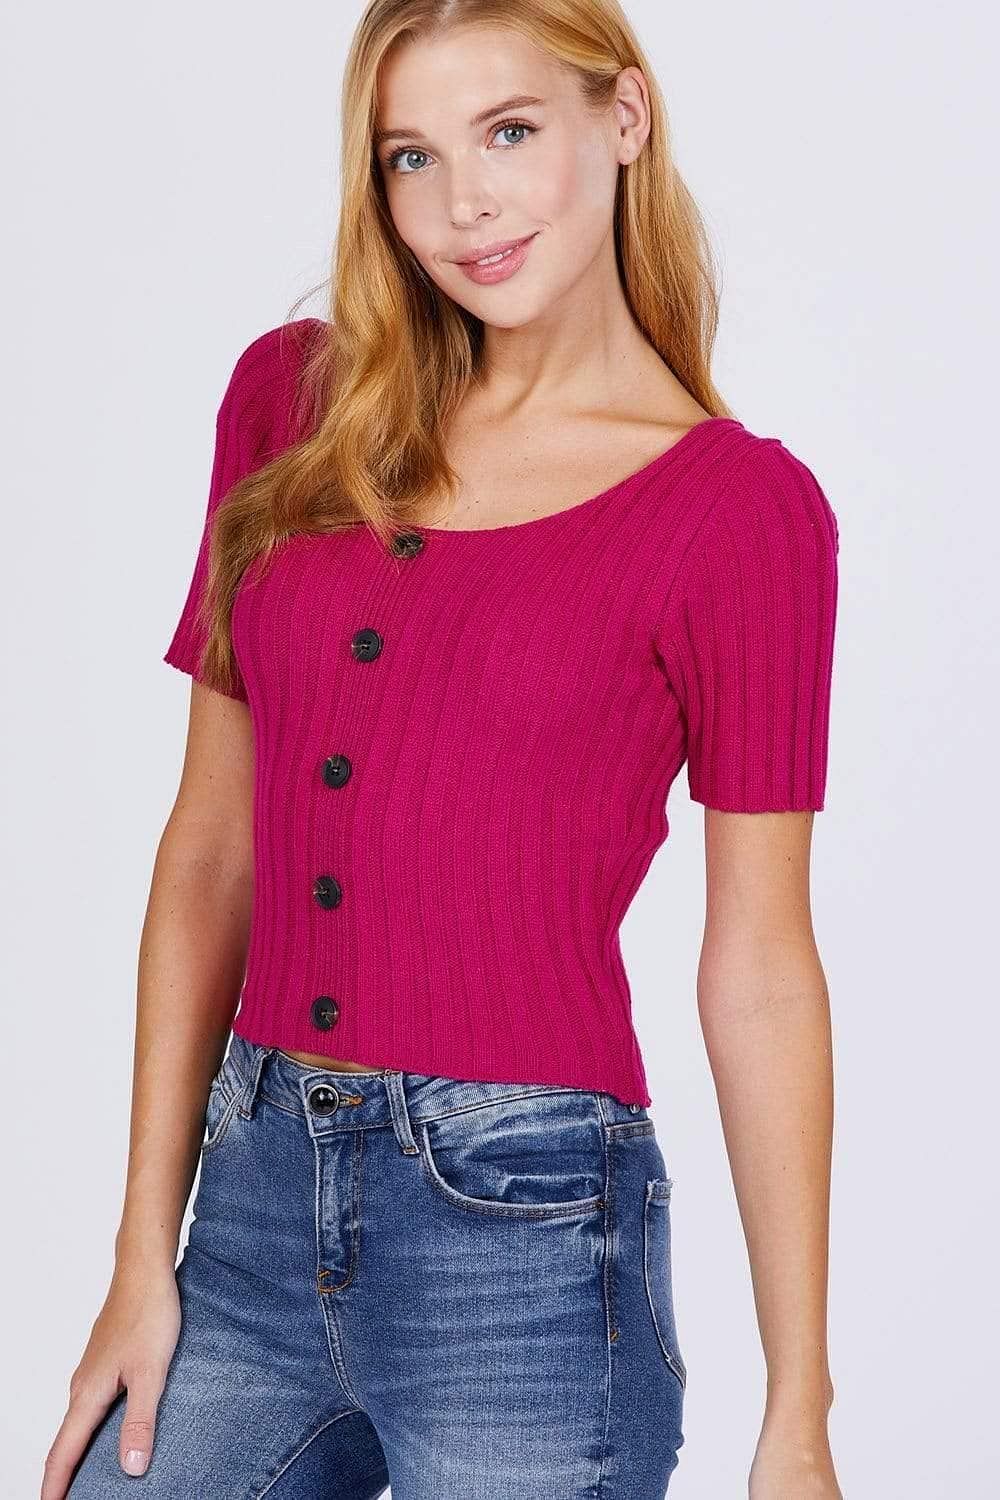 Fuchsia Short Sleeve Rib Knitted Sweater - Shopping Therapy M Top